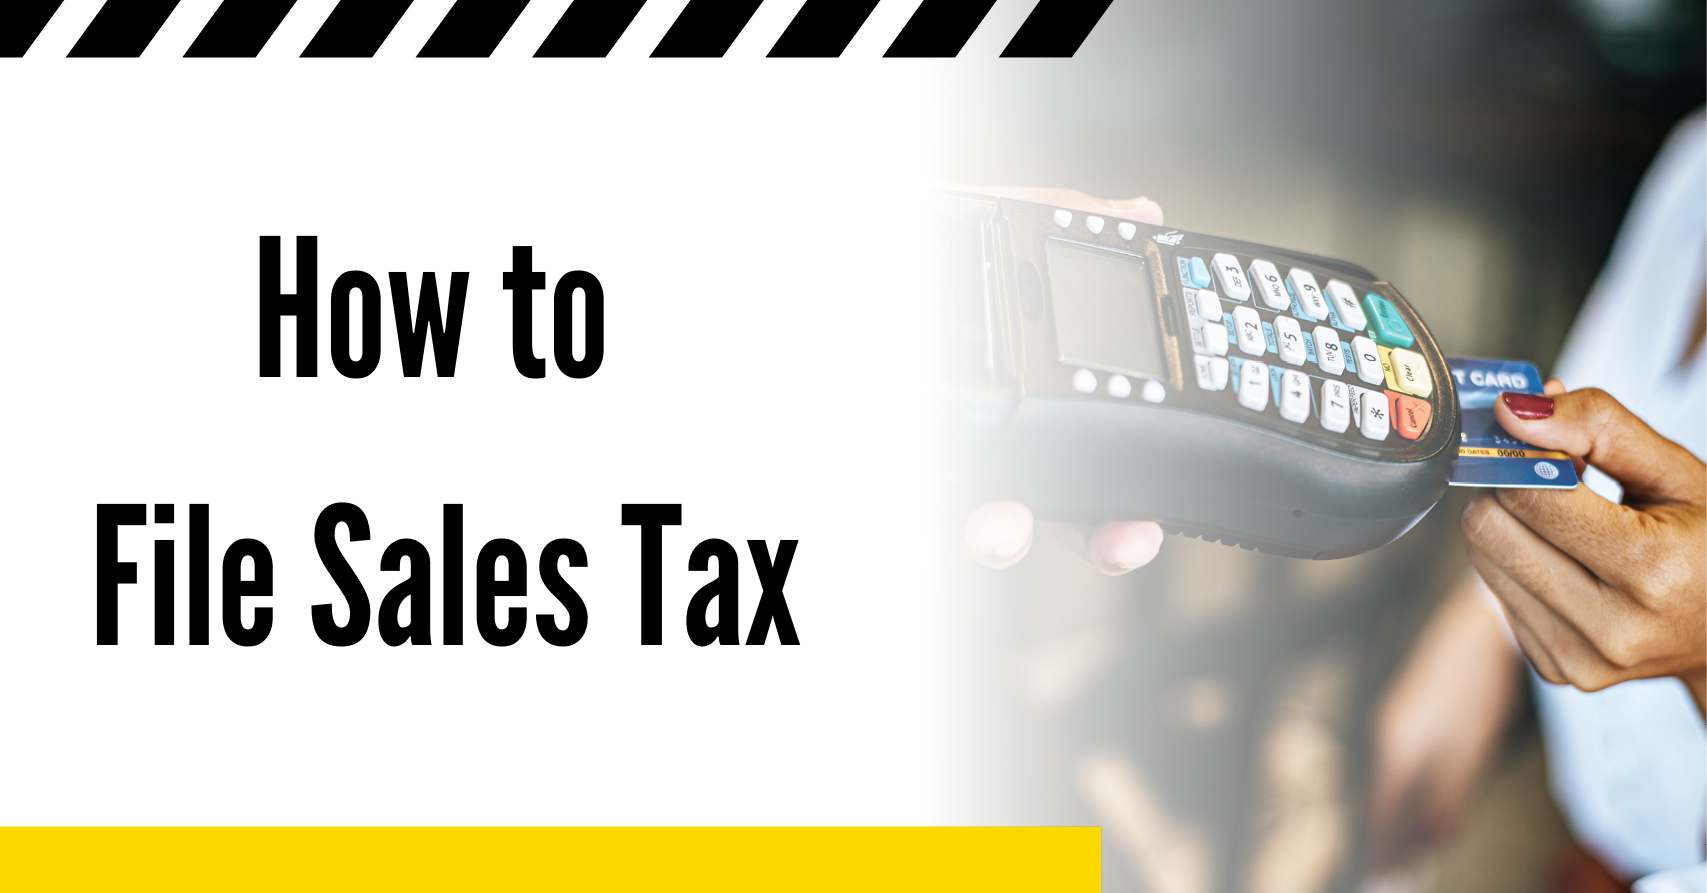 Everything e-commerce sellers need to know about filing sales tax